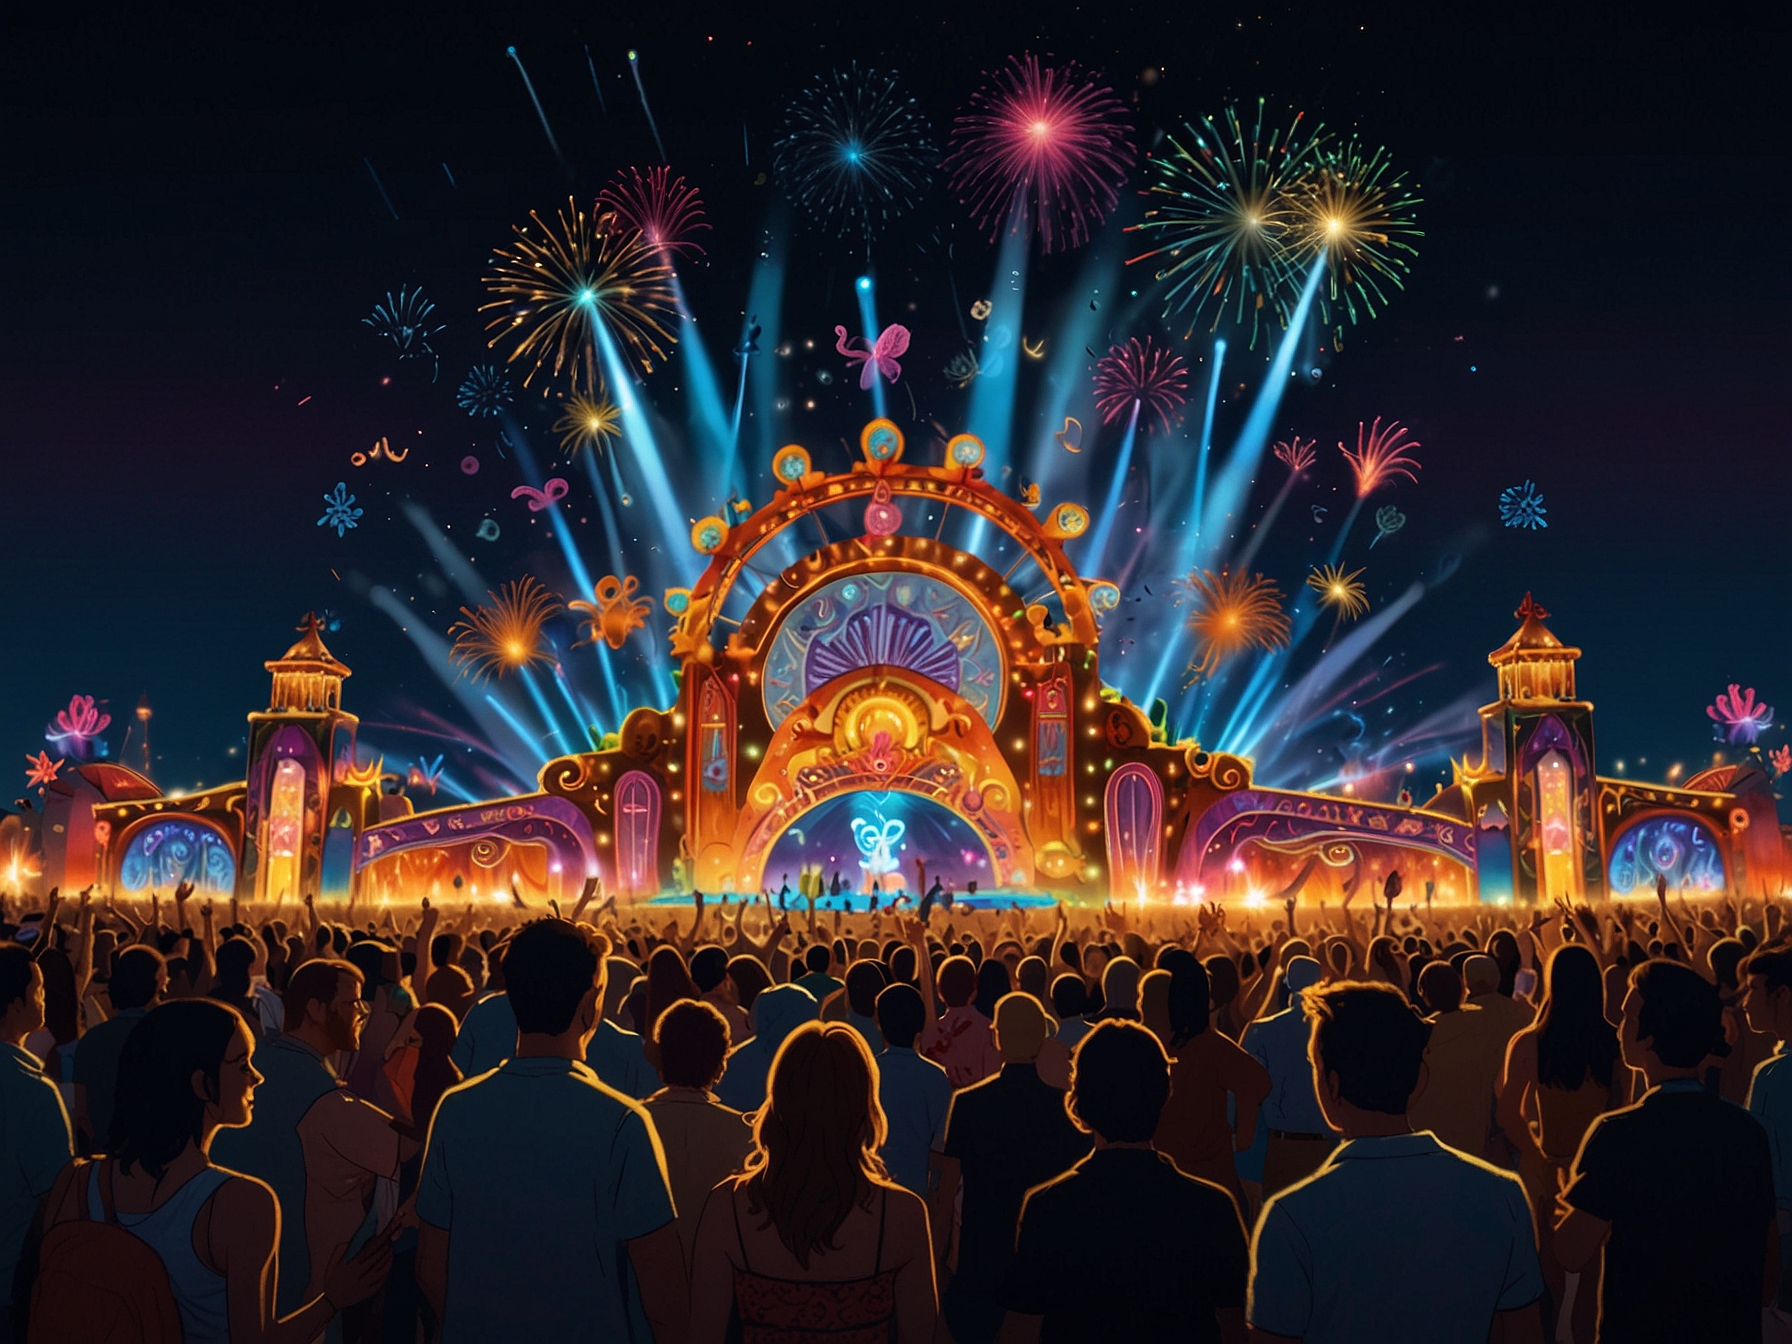 A lively scene from the Electric Daisy Carnival (EDC) Las Vegas, showcasing dazzling light shows, large crowds, and world-famous DJs performing on elaborately decorated stages.